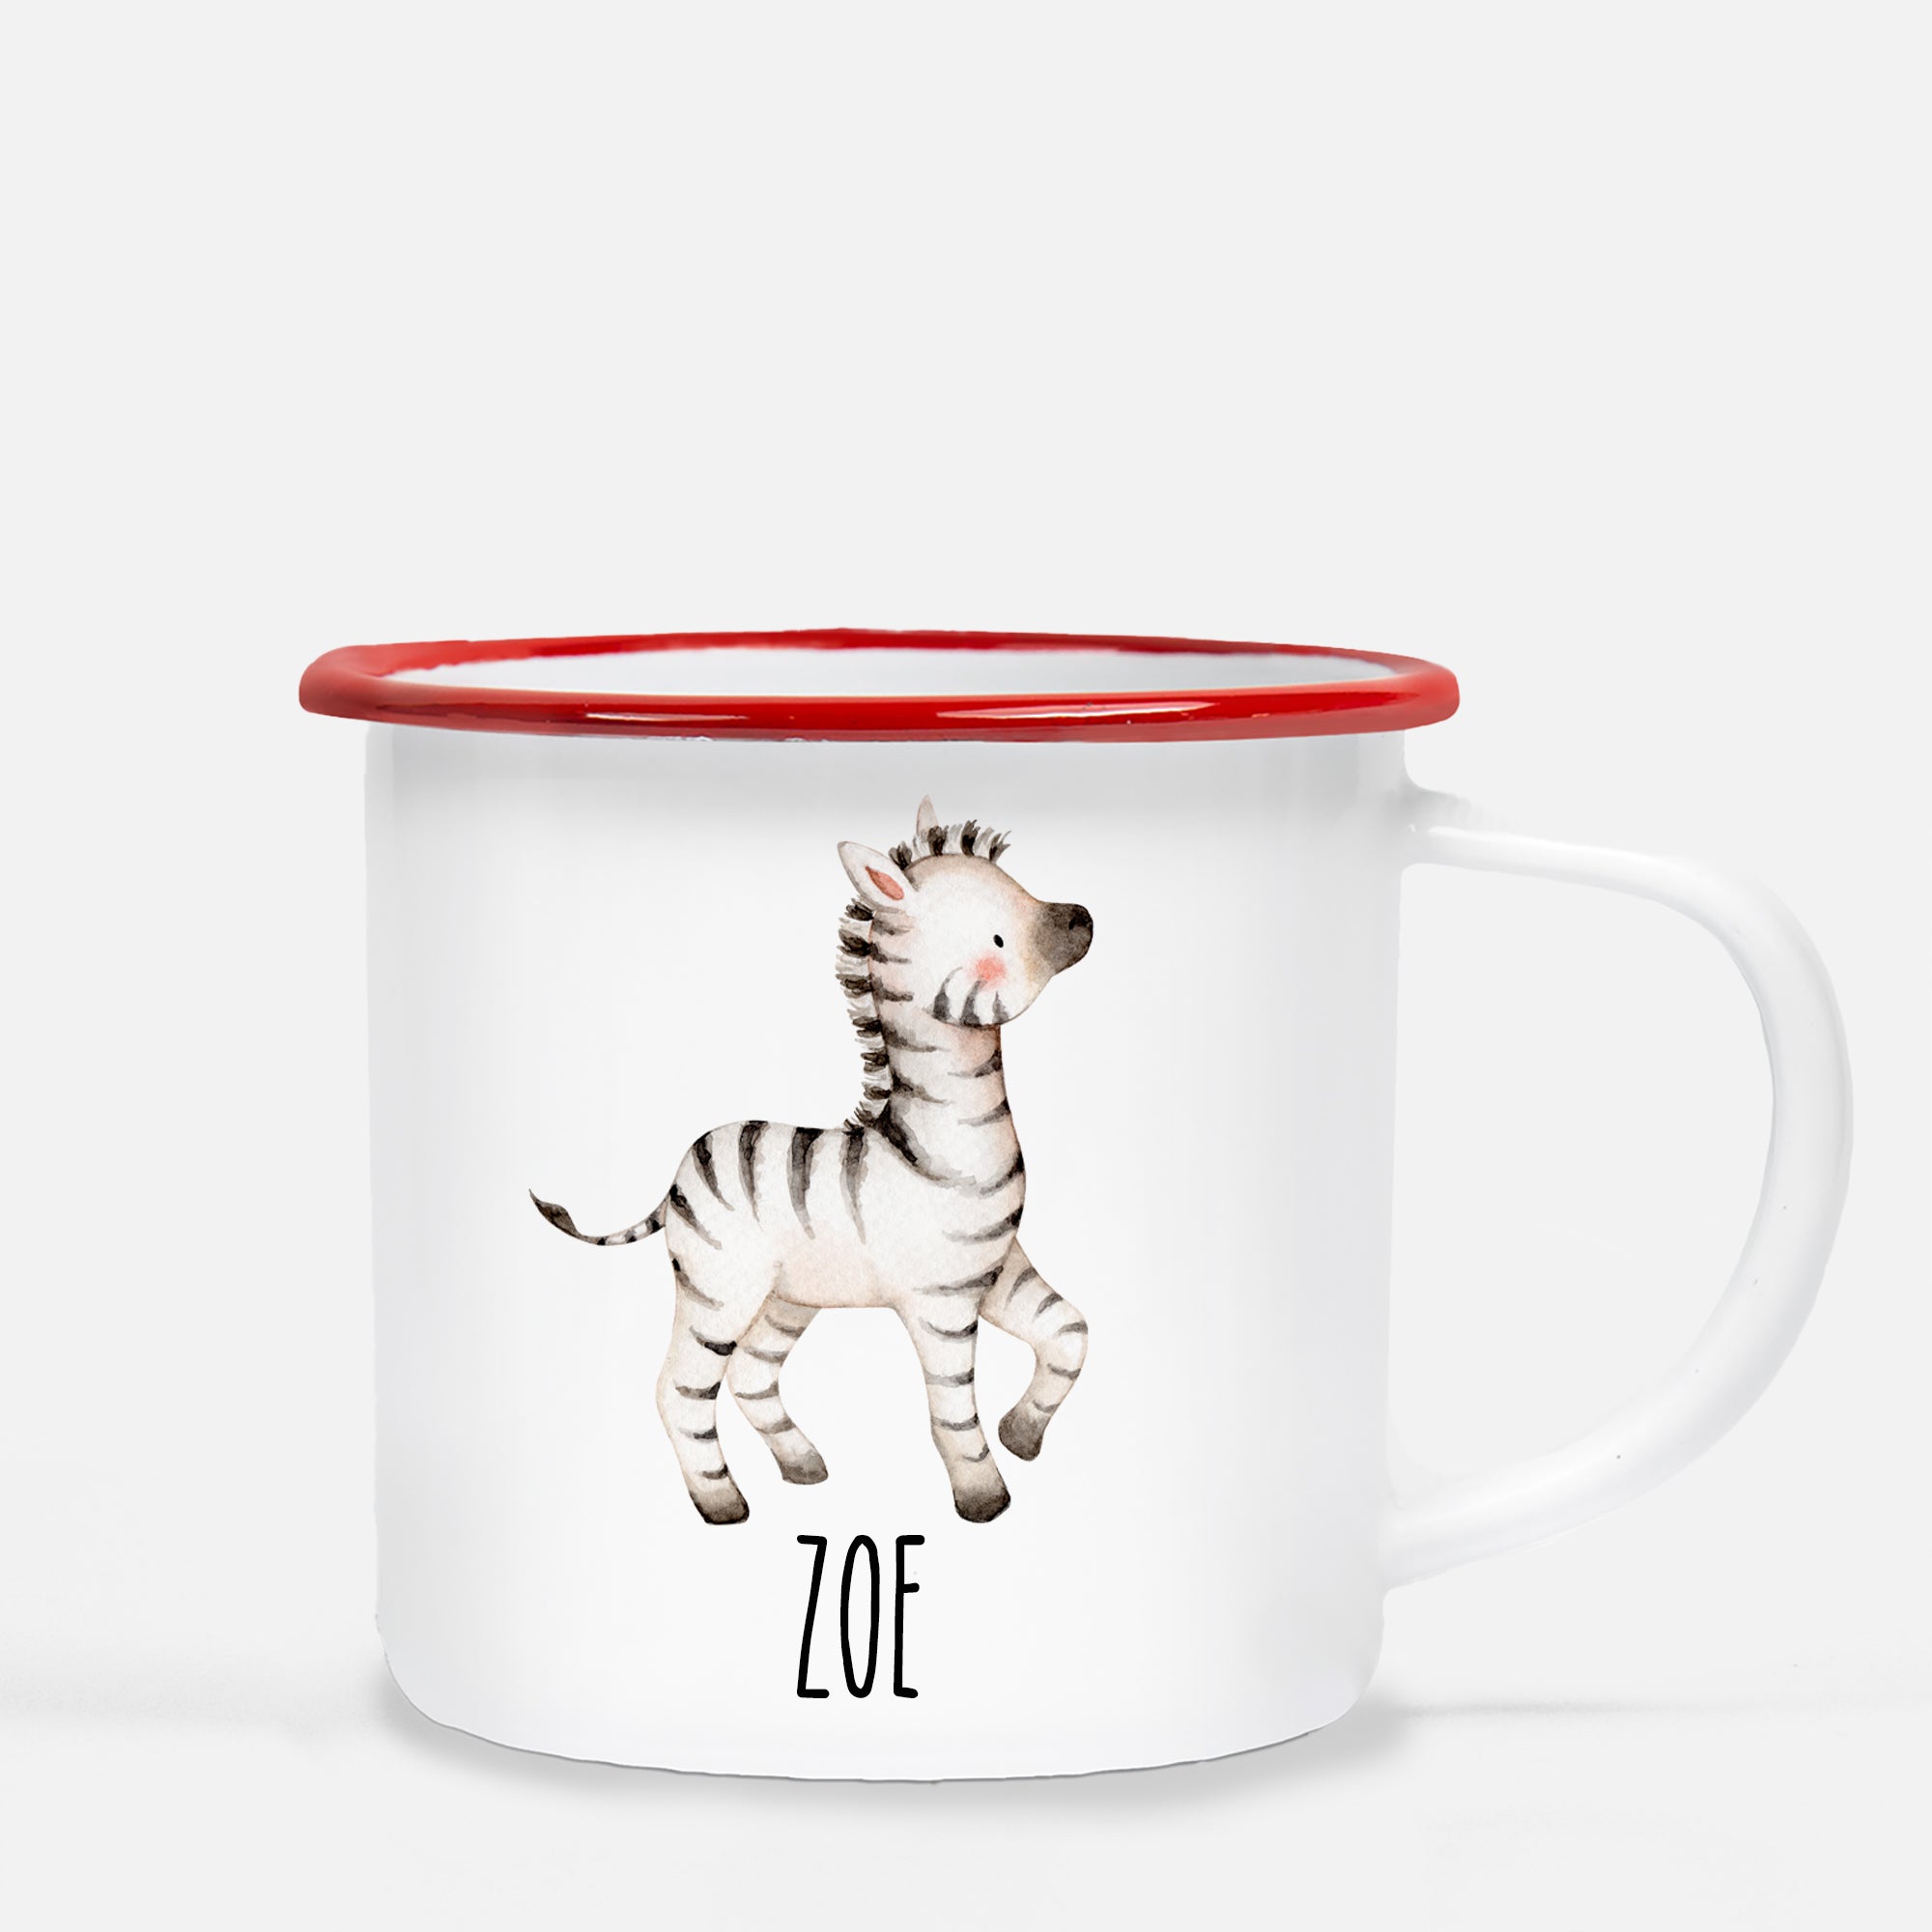 zebra camp mug, personalized with child's name, Pipsy.com, red lip